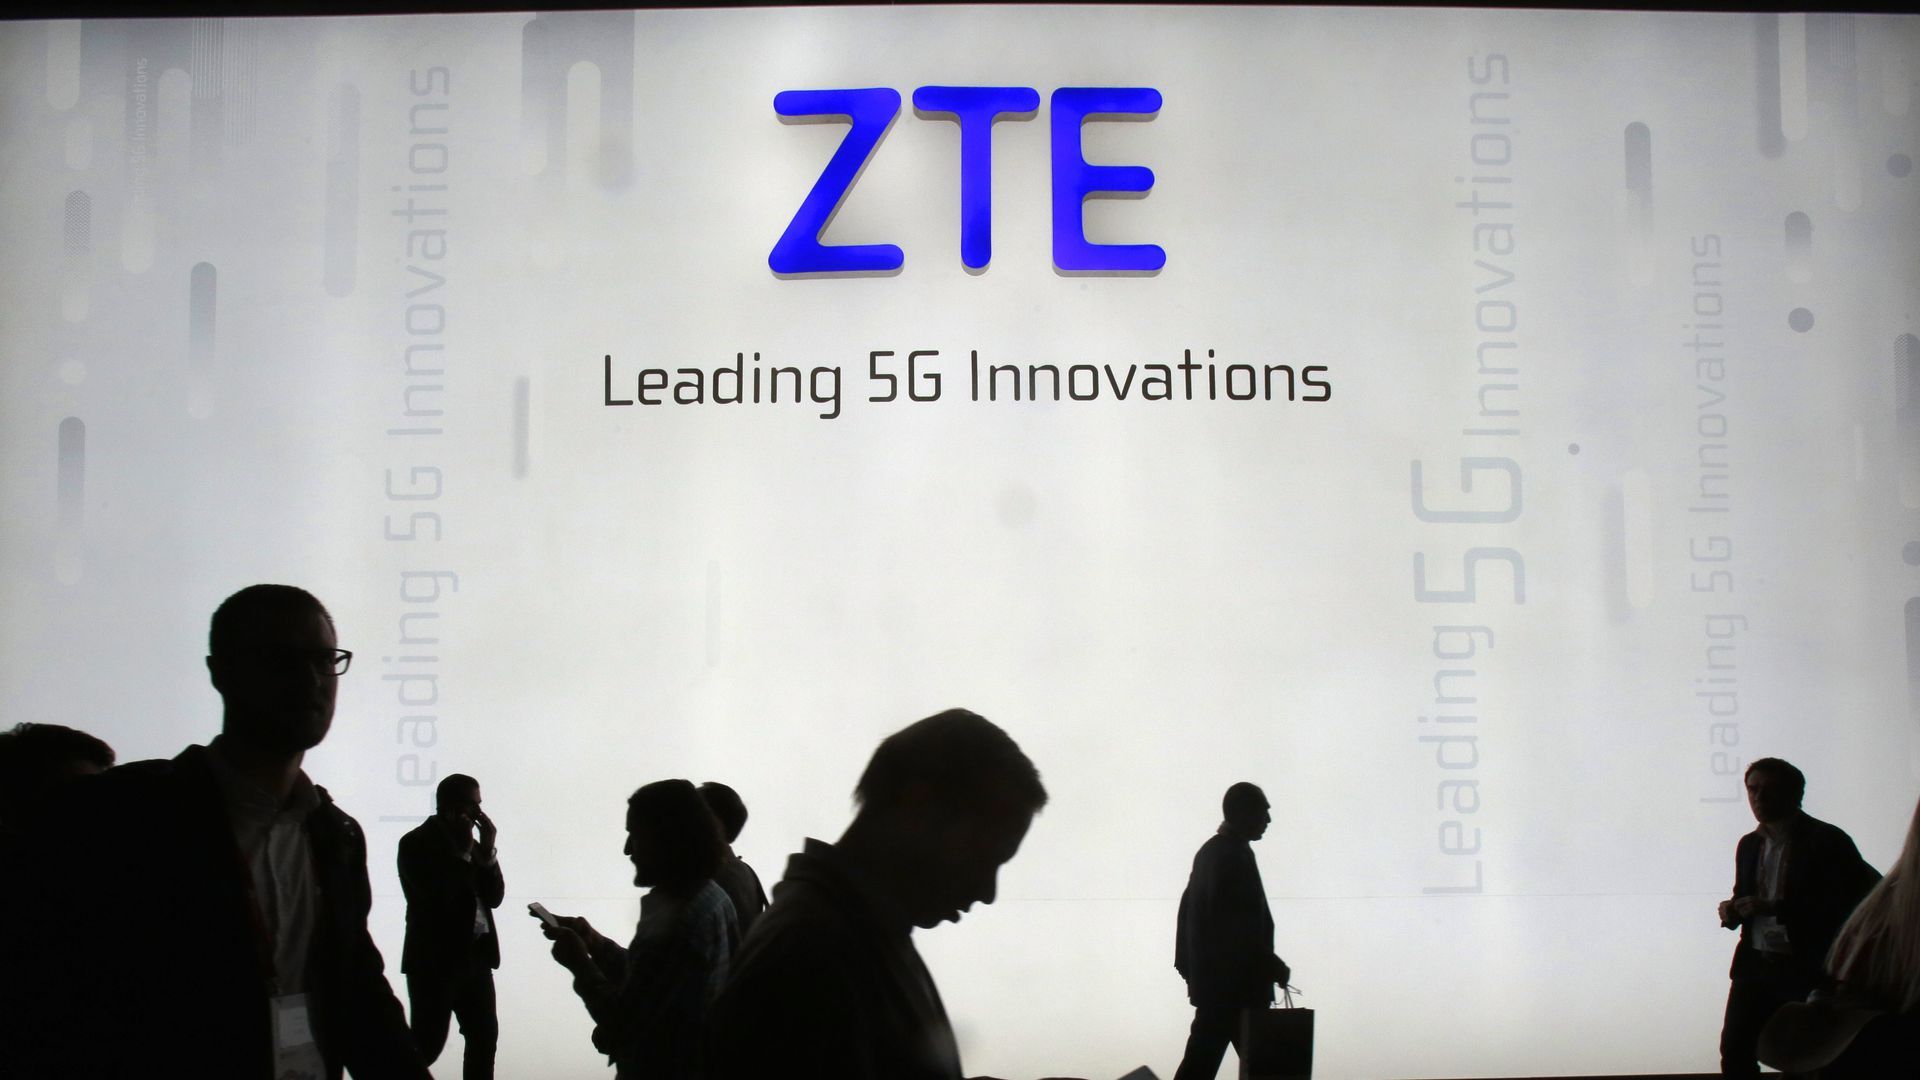 ZTE logo on wall with shadowy human figures below